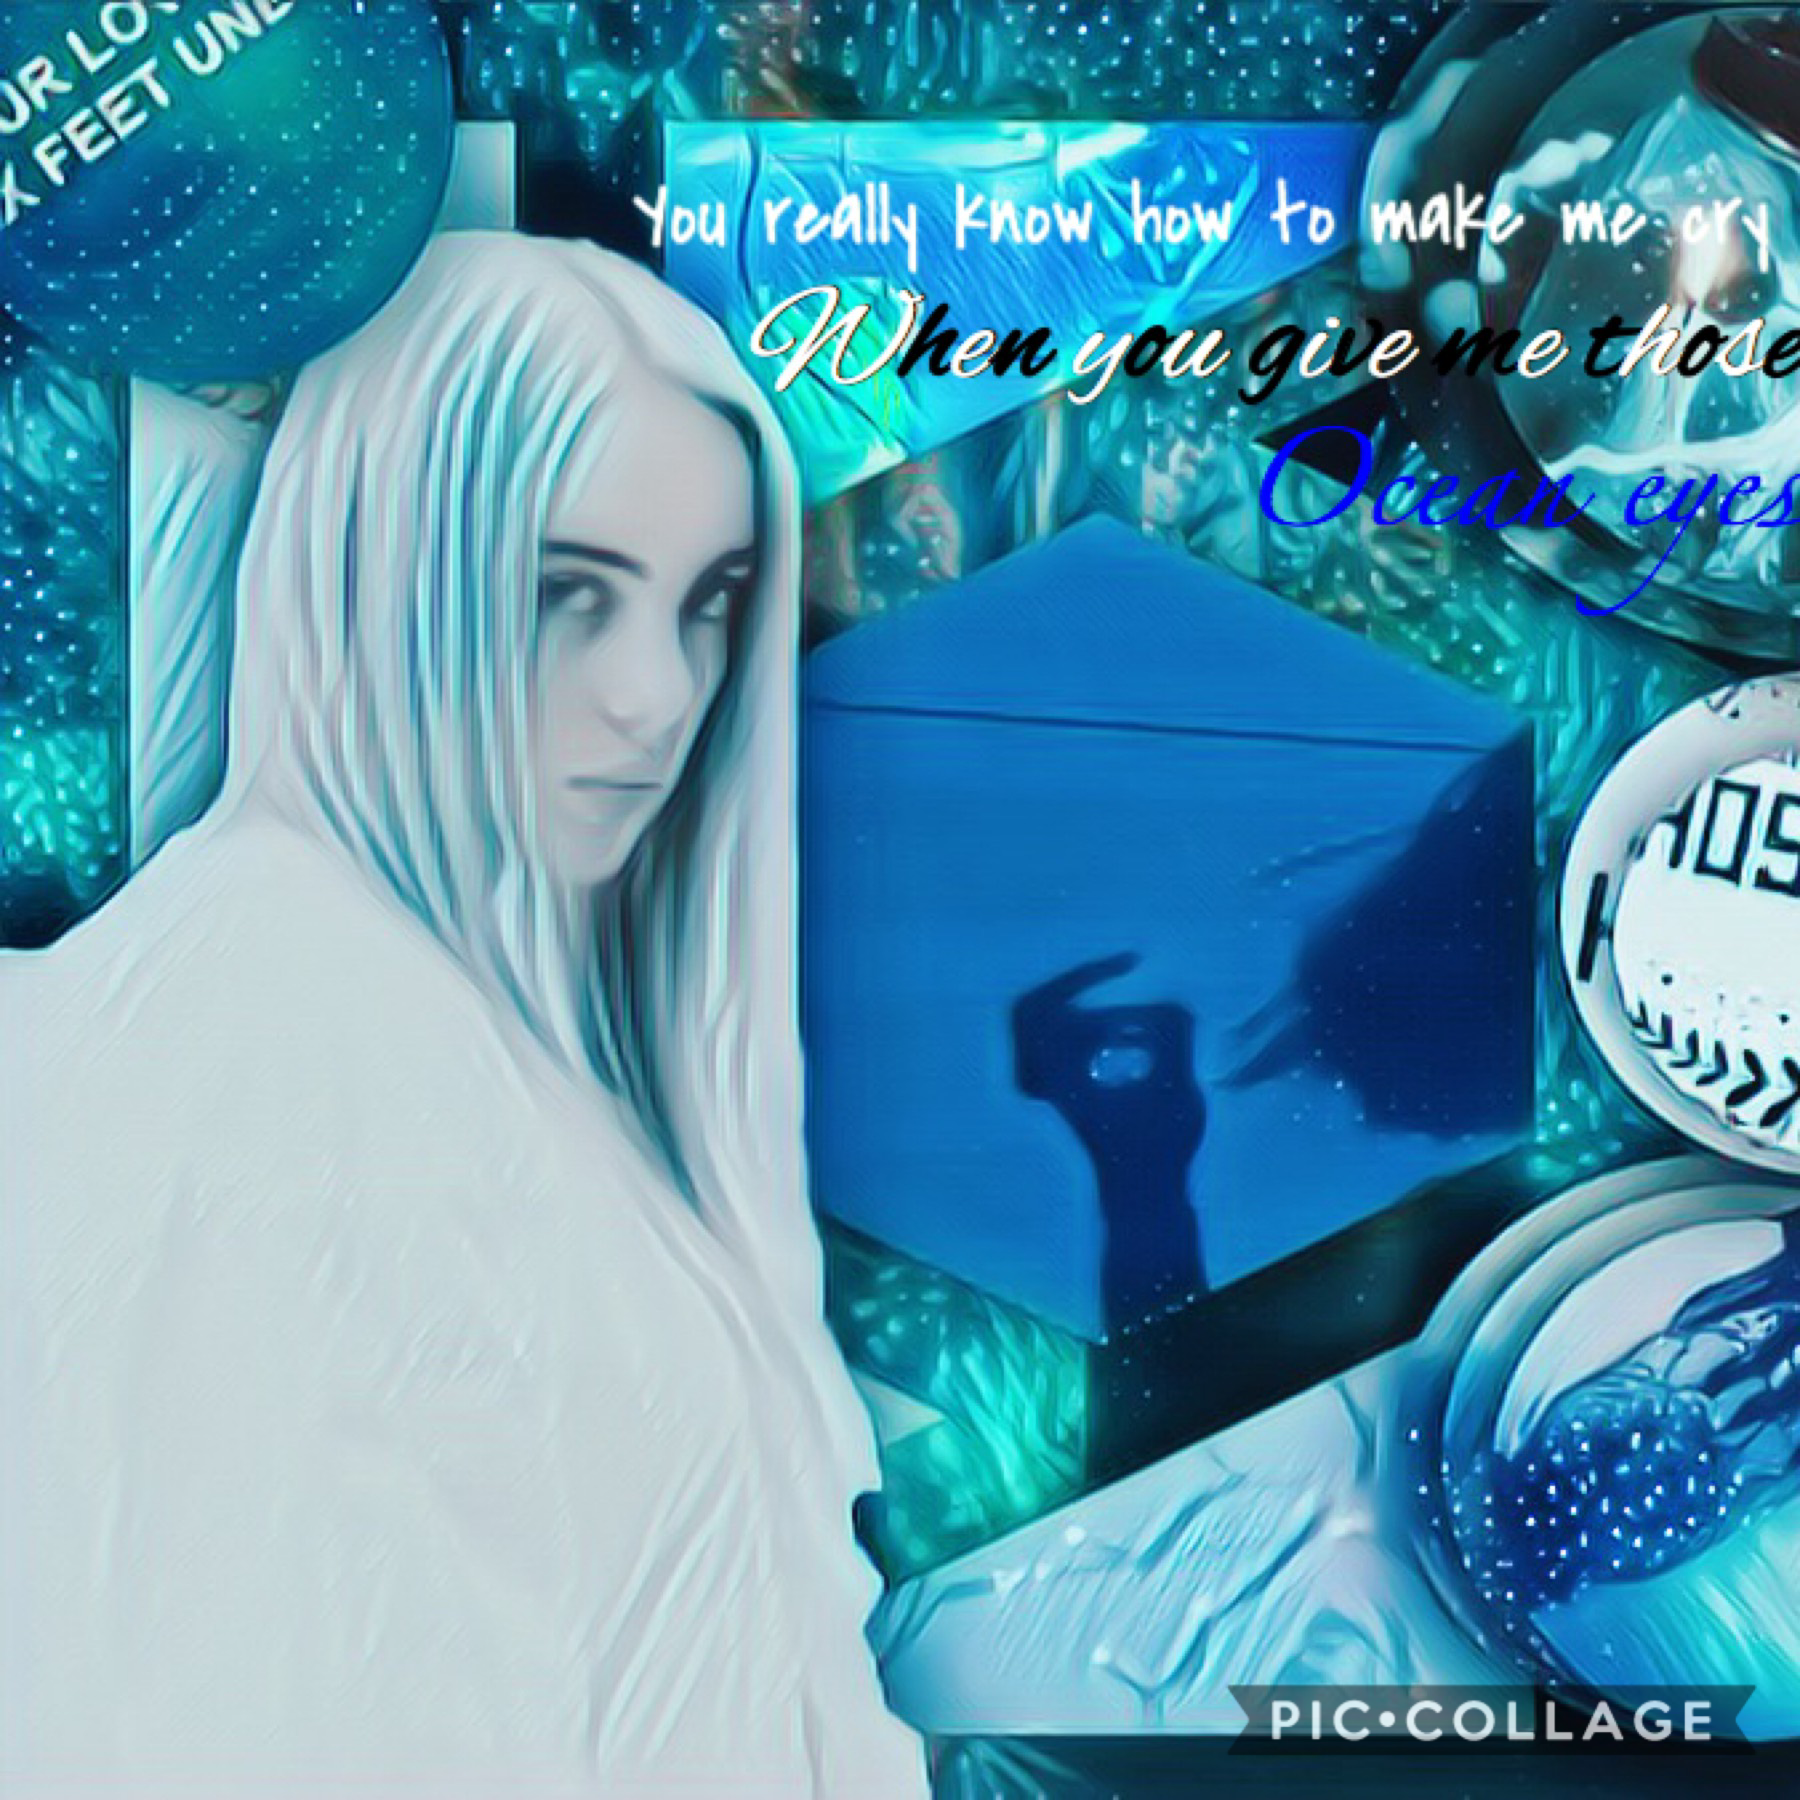 Fourth collage! I’m just gonna say this now I’m a big Billie Eilish fan so tell me if you are too!